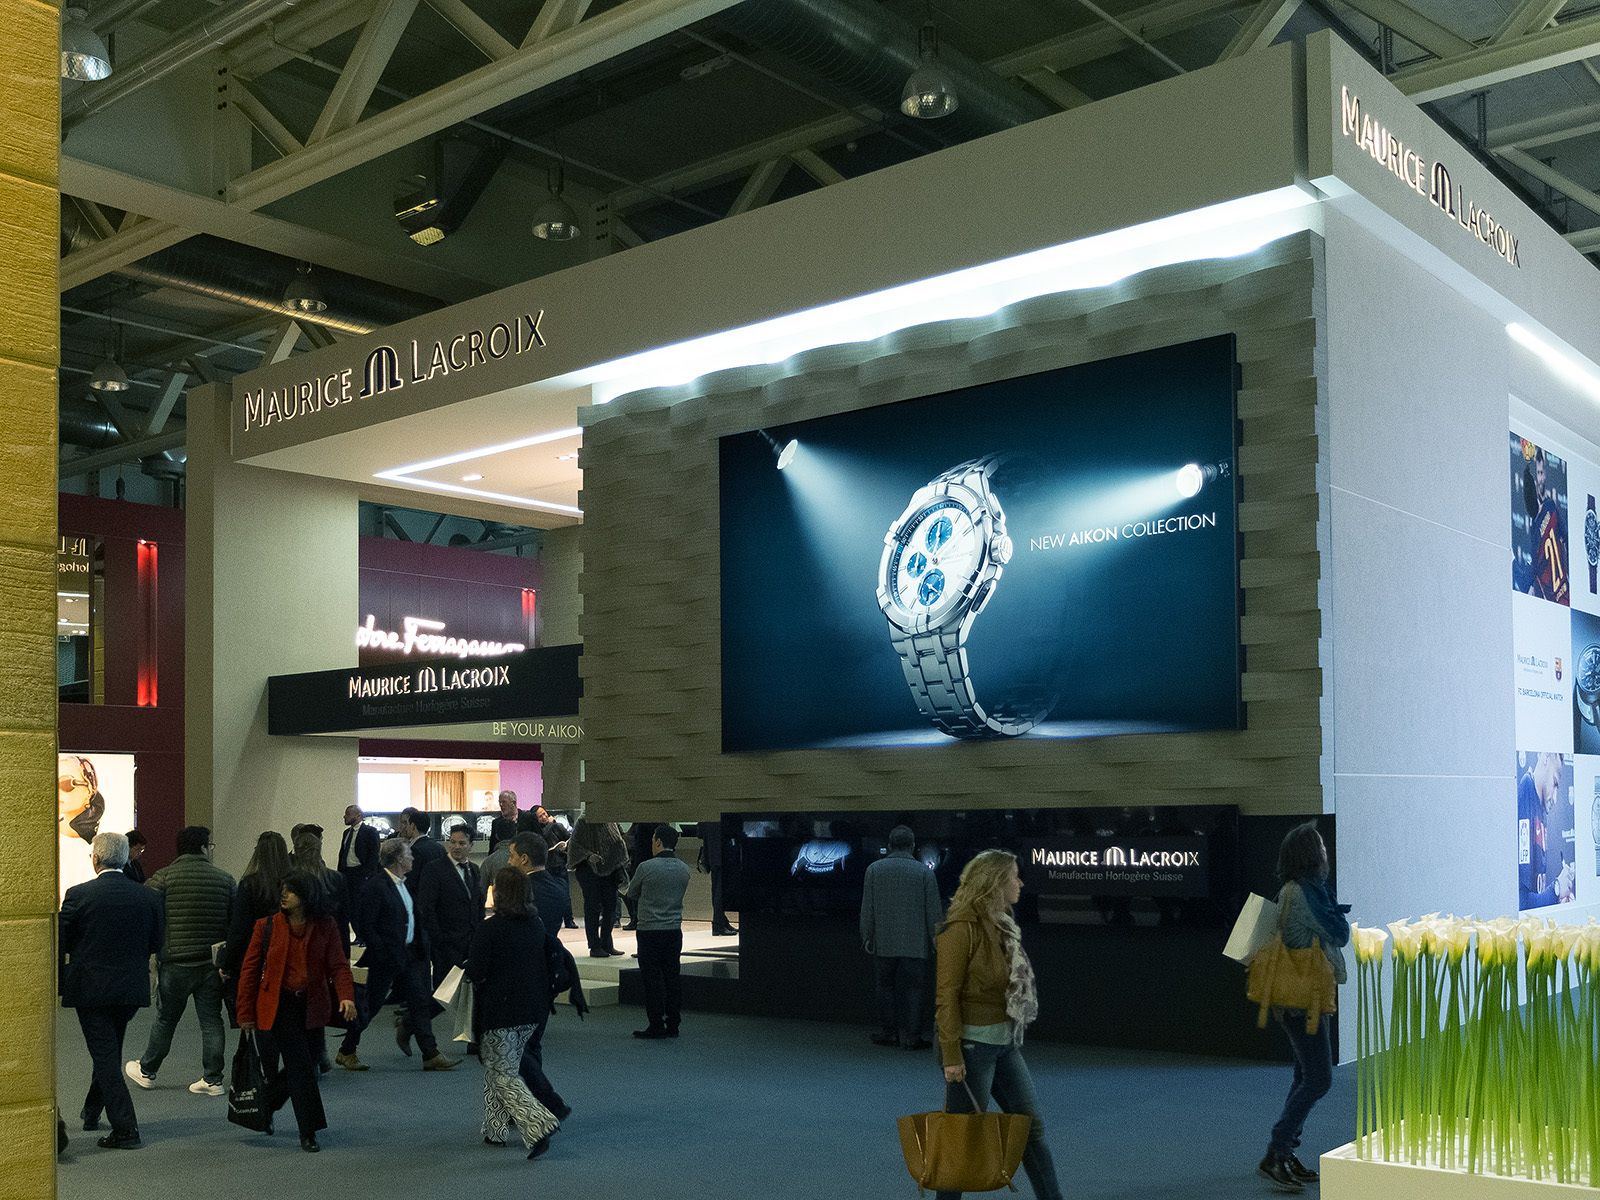 Maurice Lacroix's booth for Baselworld Fair (Switzerland)